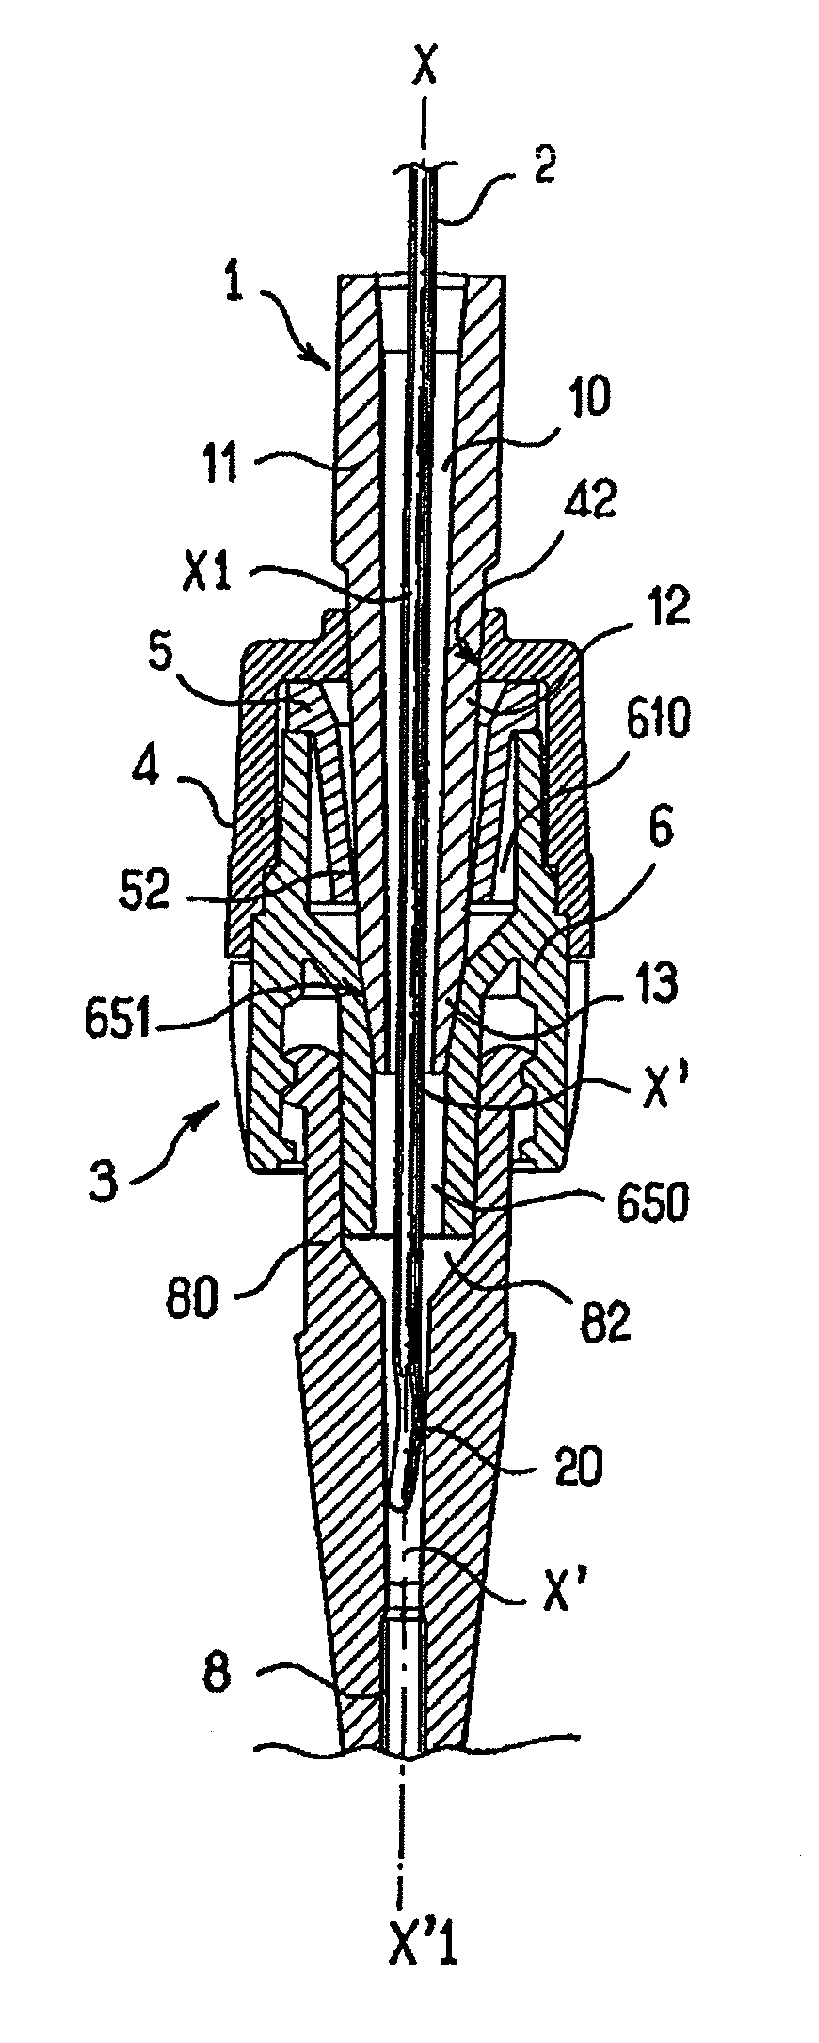 Device for introducing a catheter guide wire into a vessel